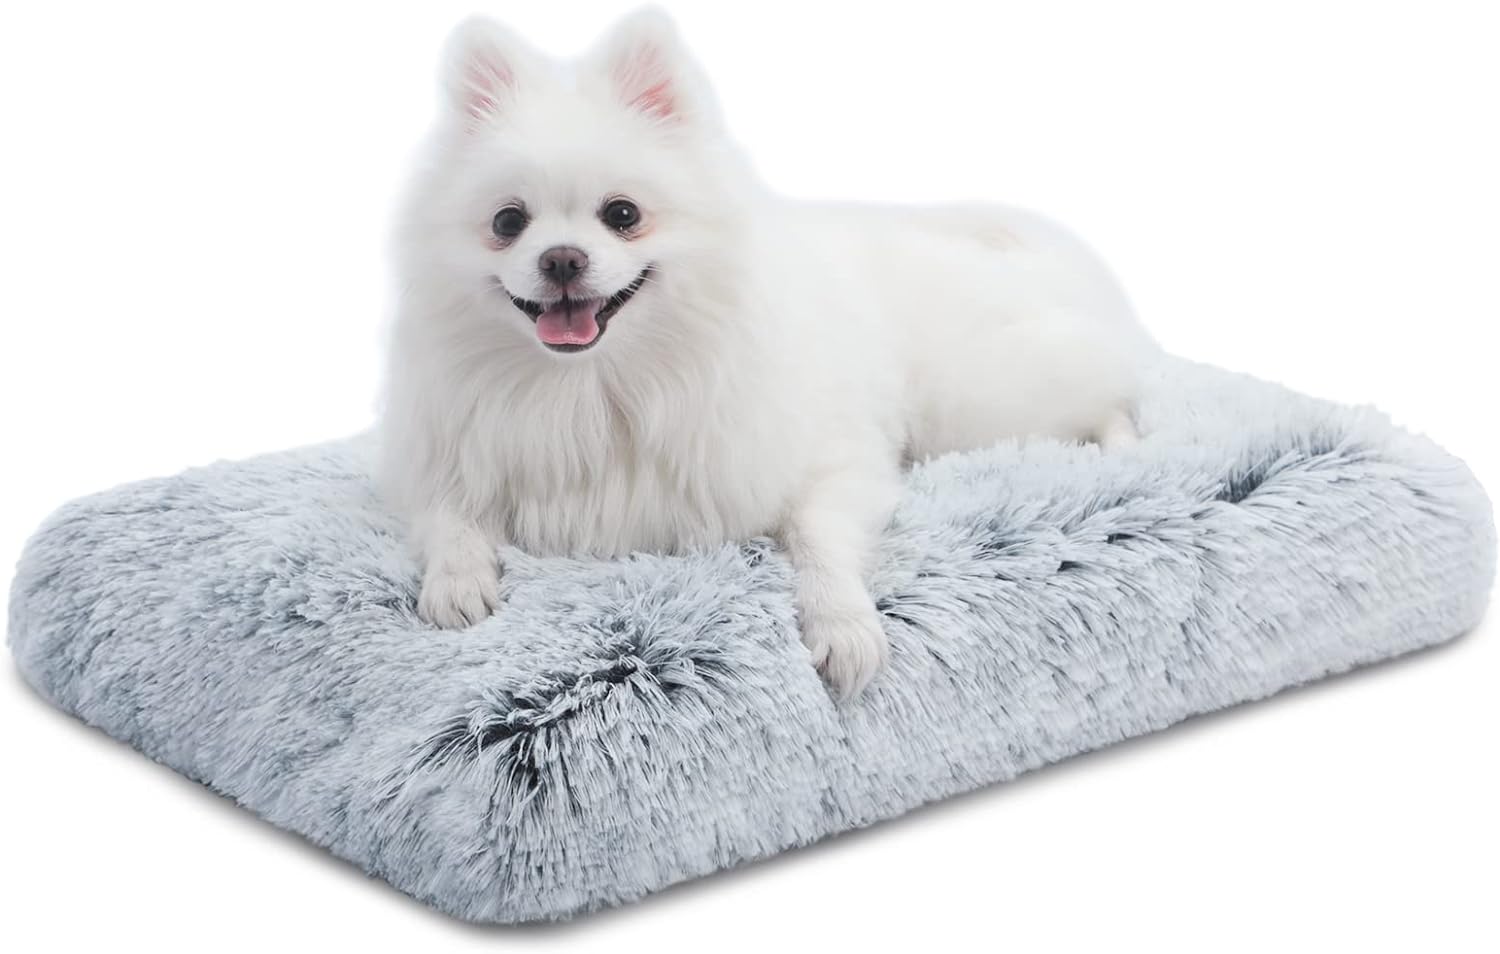 CHAMPETS Washable Dog Bed for Crate, Grey, 29X21,Large Dog Bed Washable for Small,Medium,Large,Extra Large Dog, Waterproof Dog Beds for Large Dogs with Washable Cover,Crate Pet Bed for Medium Dogs